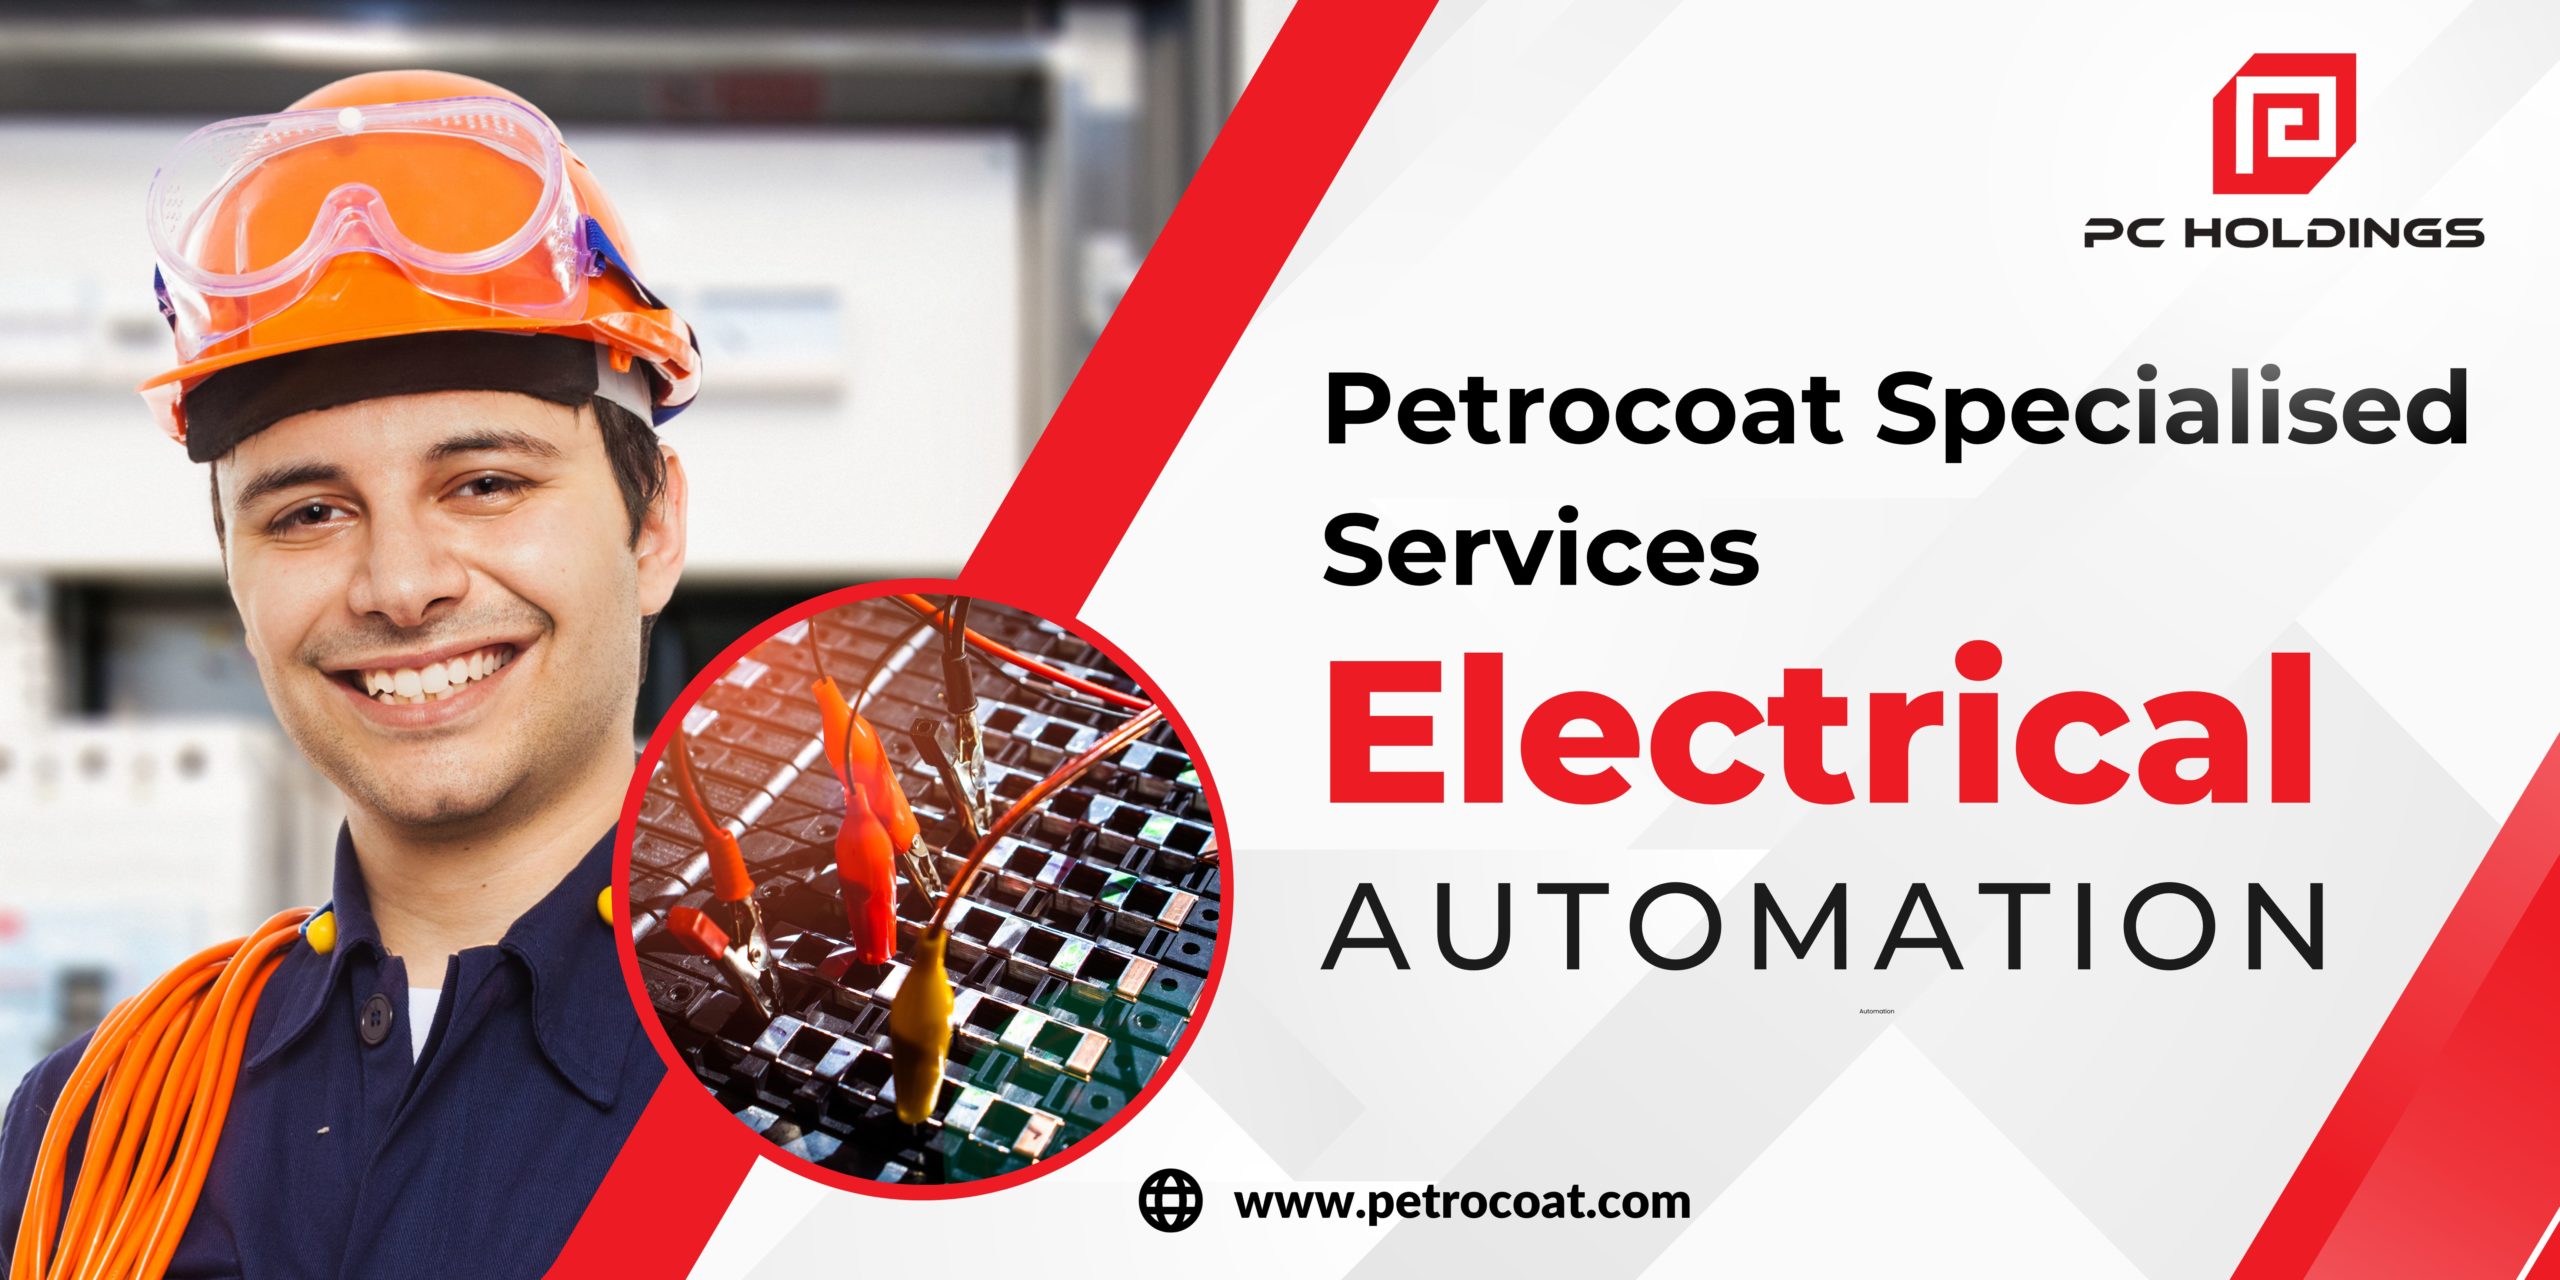 Electrical Automation Services by PC Holdings